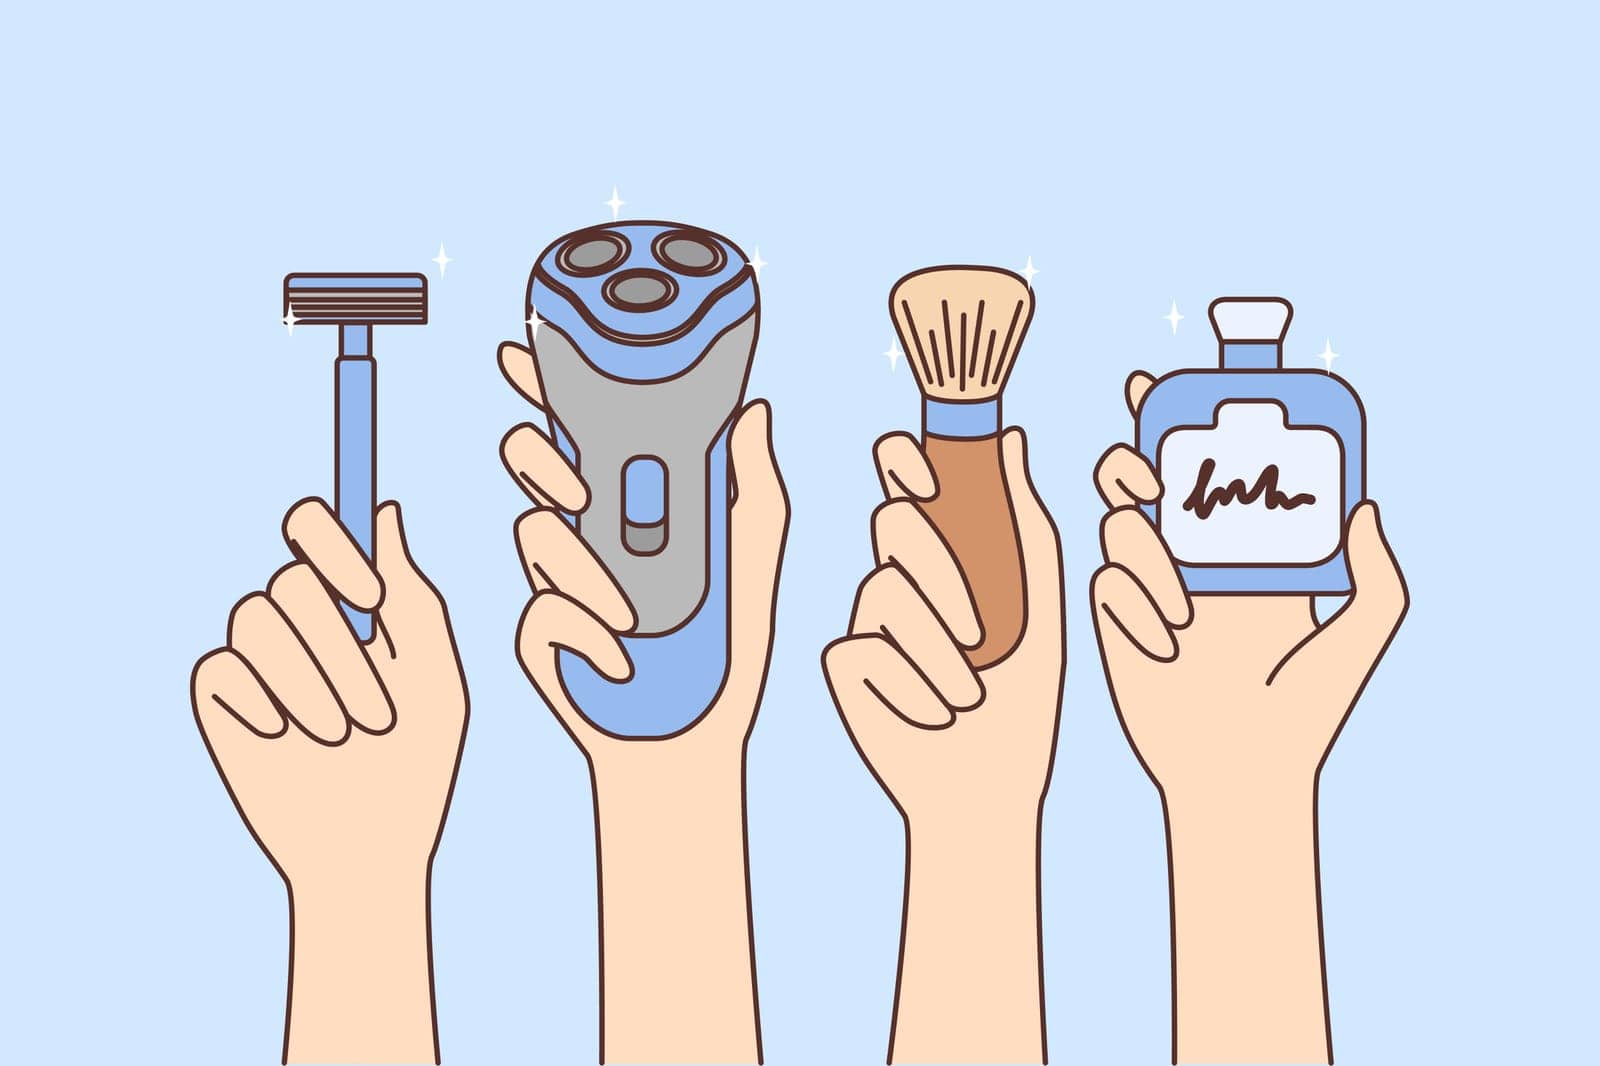 Hands holding different tools for shaving by Vasilyeu